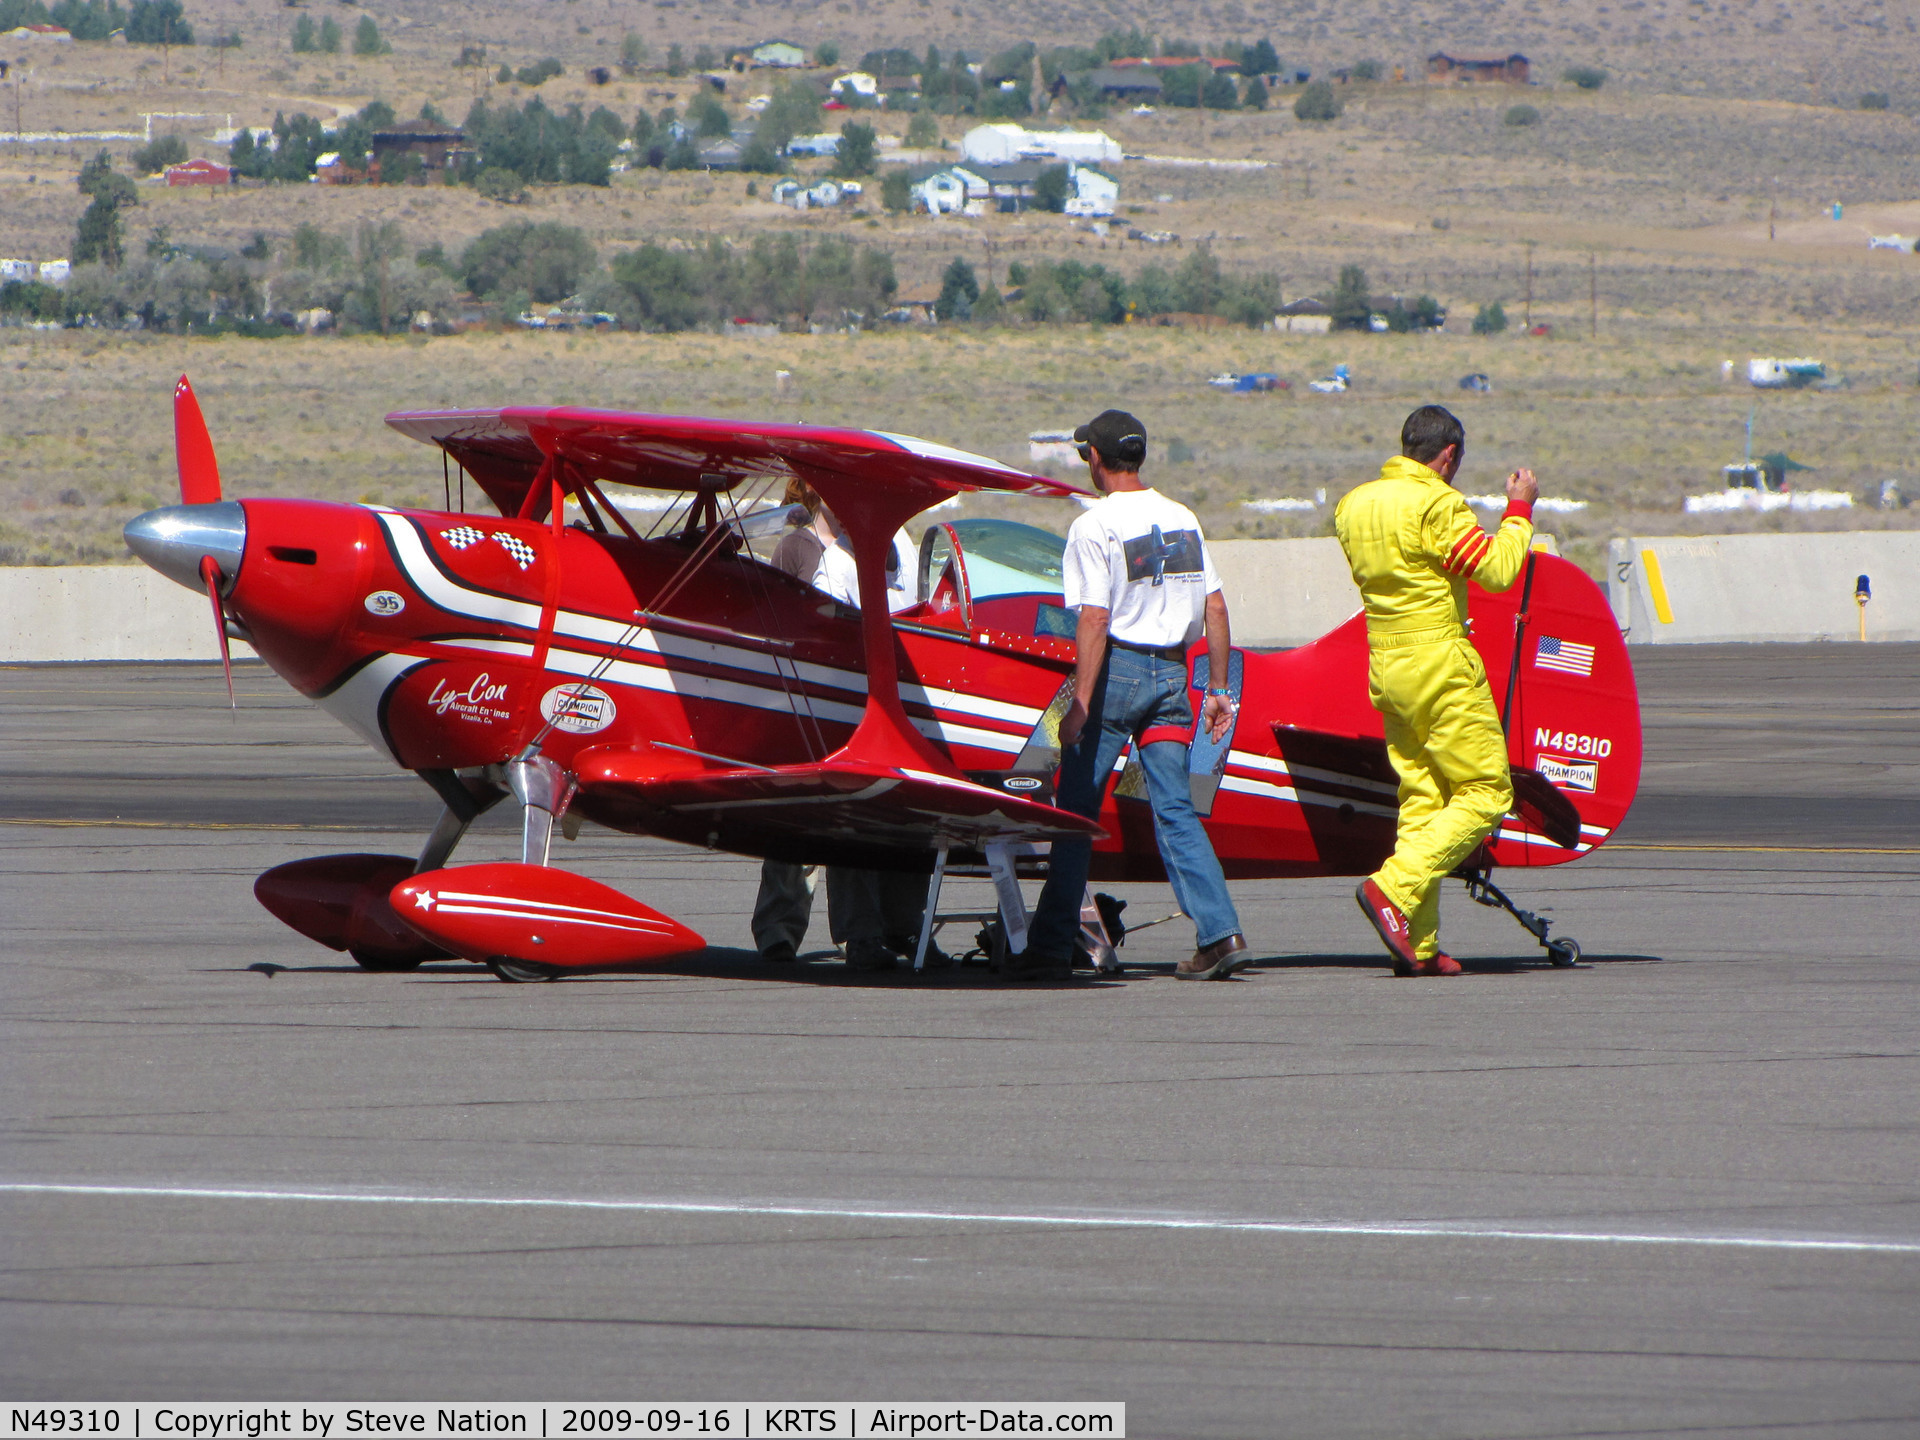 N49310, 1982 Aerotek Pitts S-1S Special C/N KA-103, Race # 711 1982 Aerotek PITTS SPECIAL S-1S after competing in morning heat in Biplane Class @ 2009 Reno Air Races - one happy pilot?